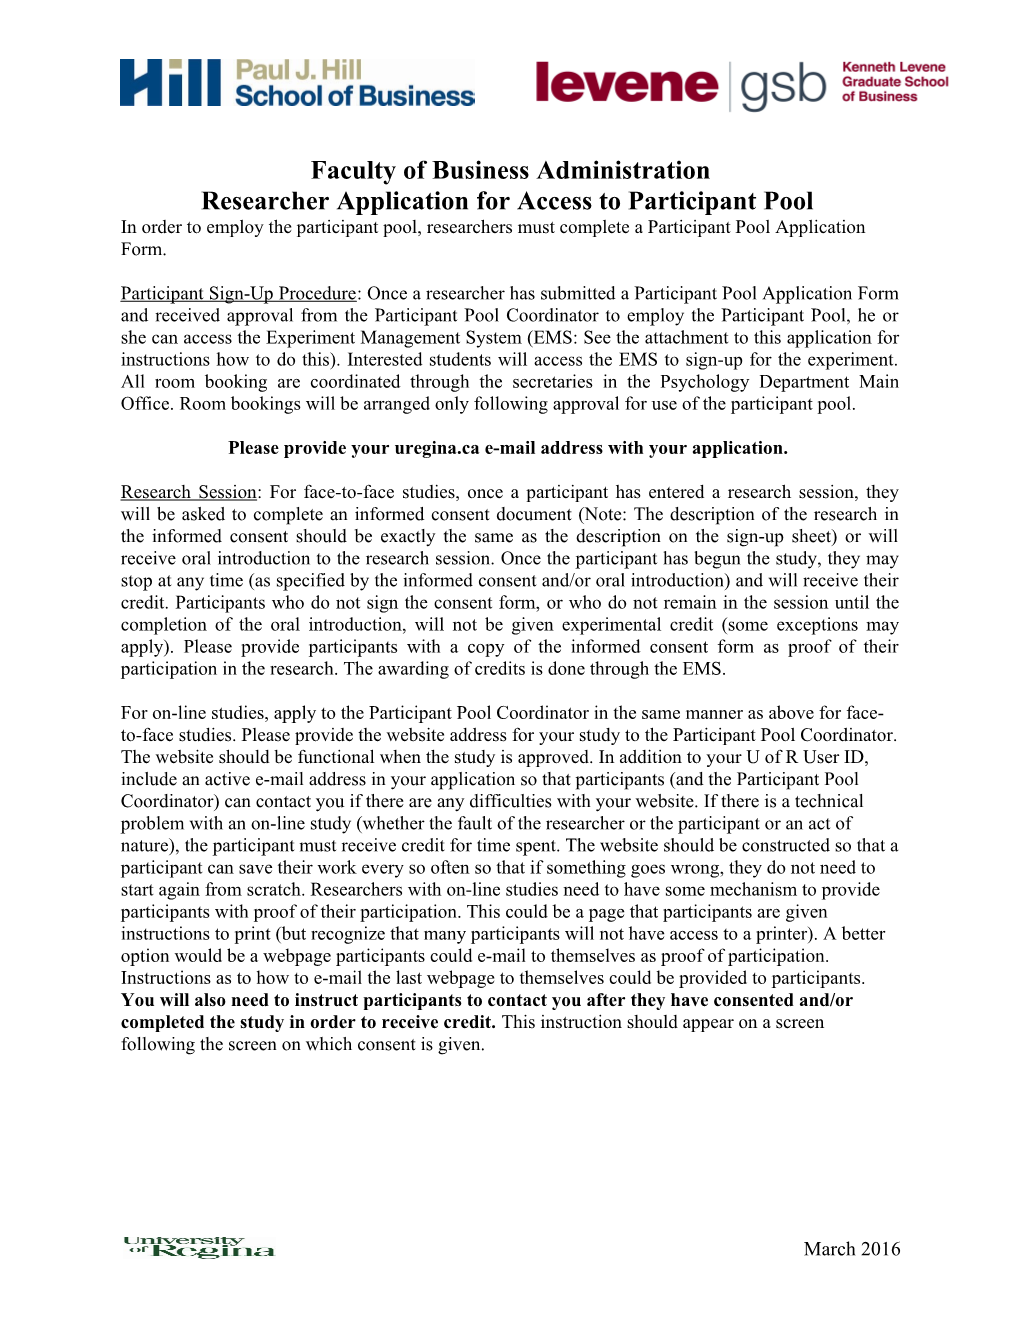 Researcher Application for Access to Participant Pool